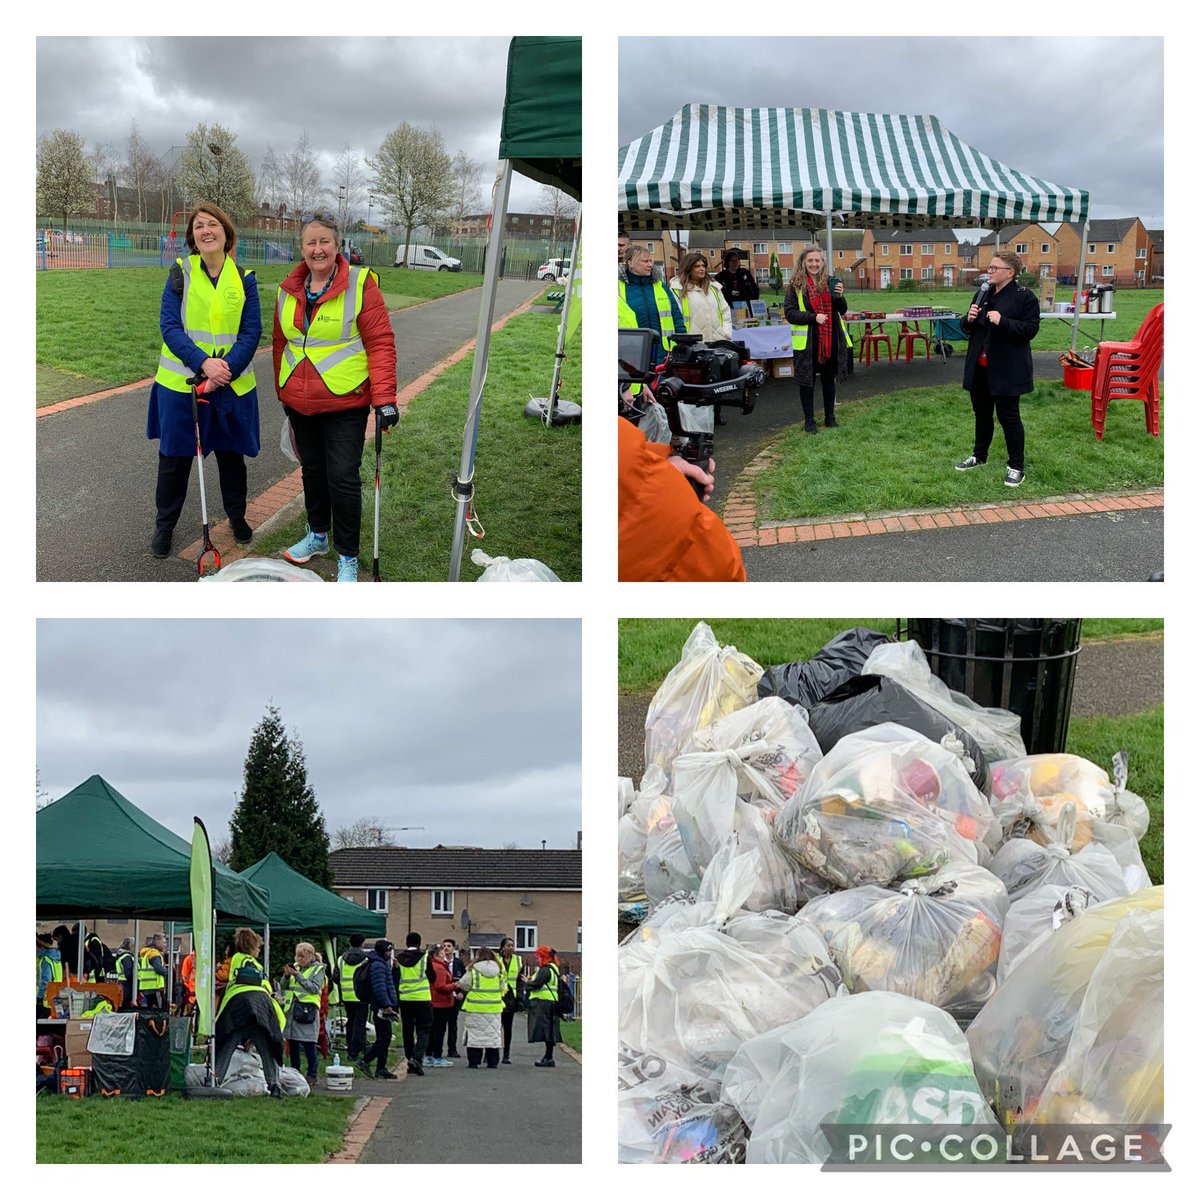 Fantastic launch of #GBSpringClean at Bradford Park, Beswick this afternoon with @bevcraig @Irene4A_B Julie Jarman, local schools @MCRActive @ManCityCouncil staff - loads of rubbish collected & great sports activities too! #McrSpringClean24